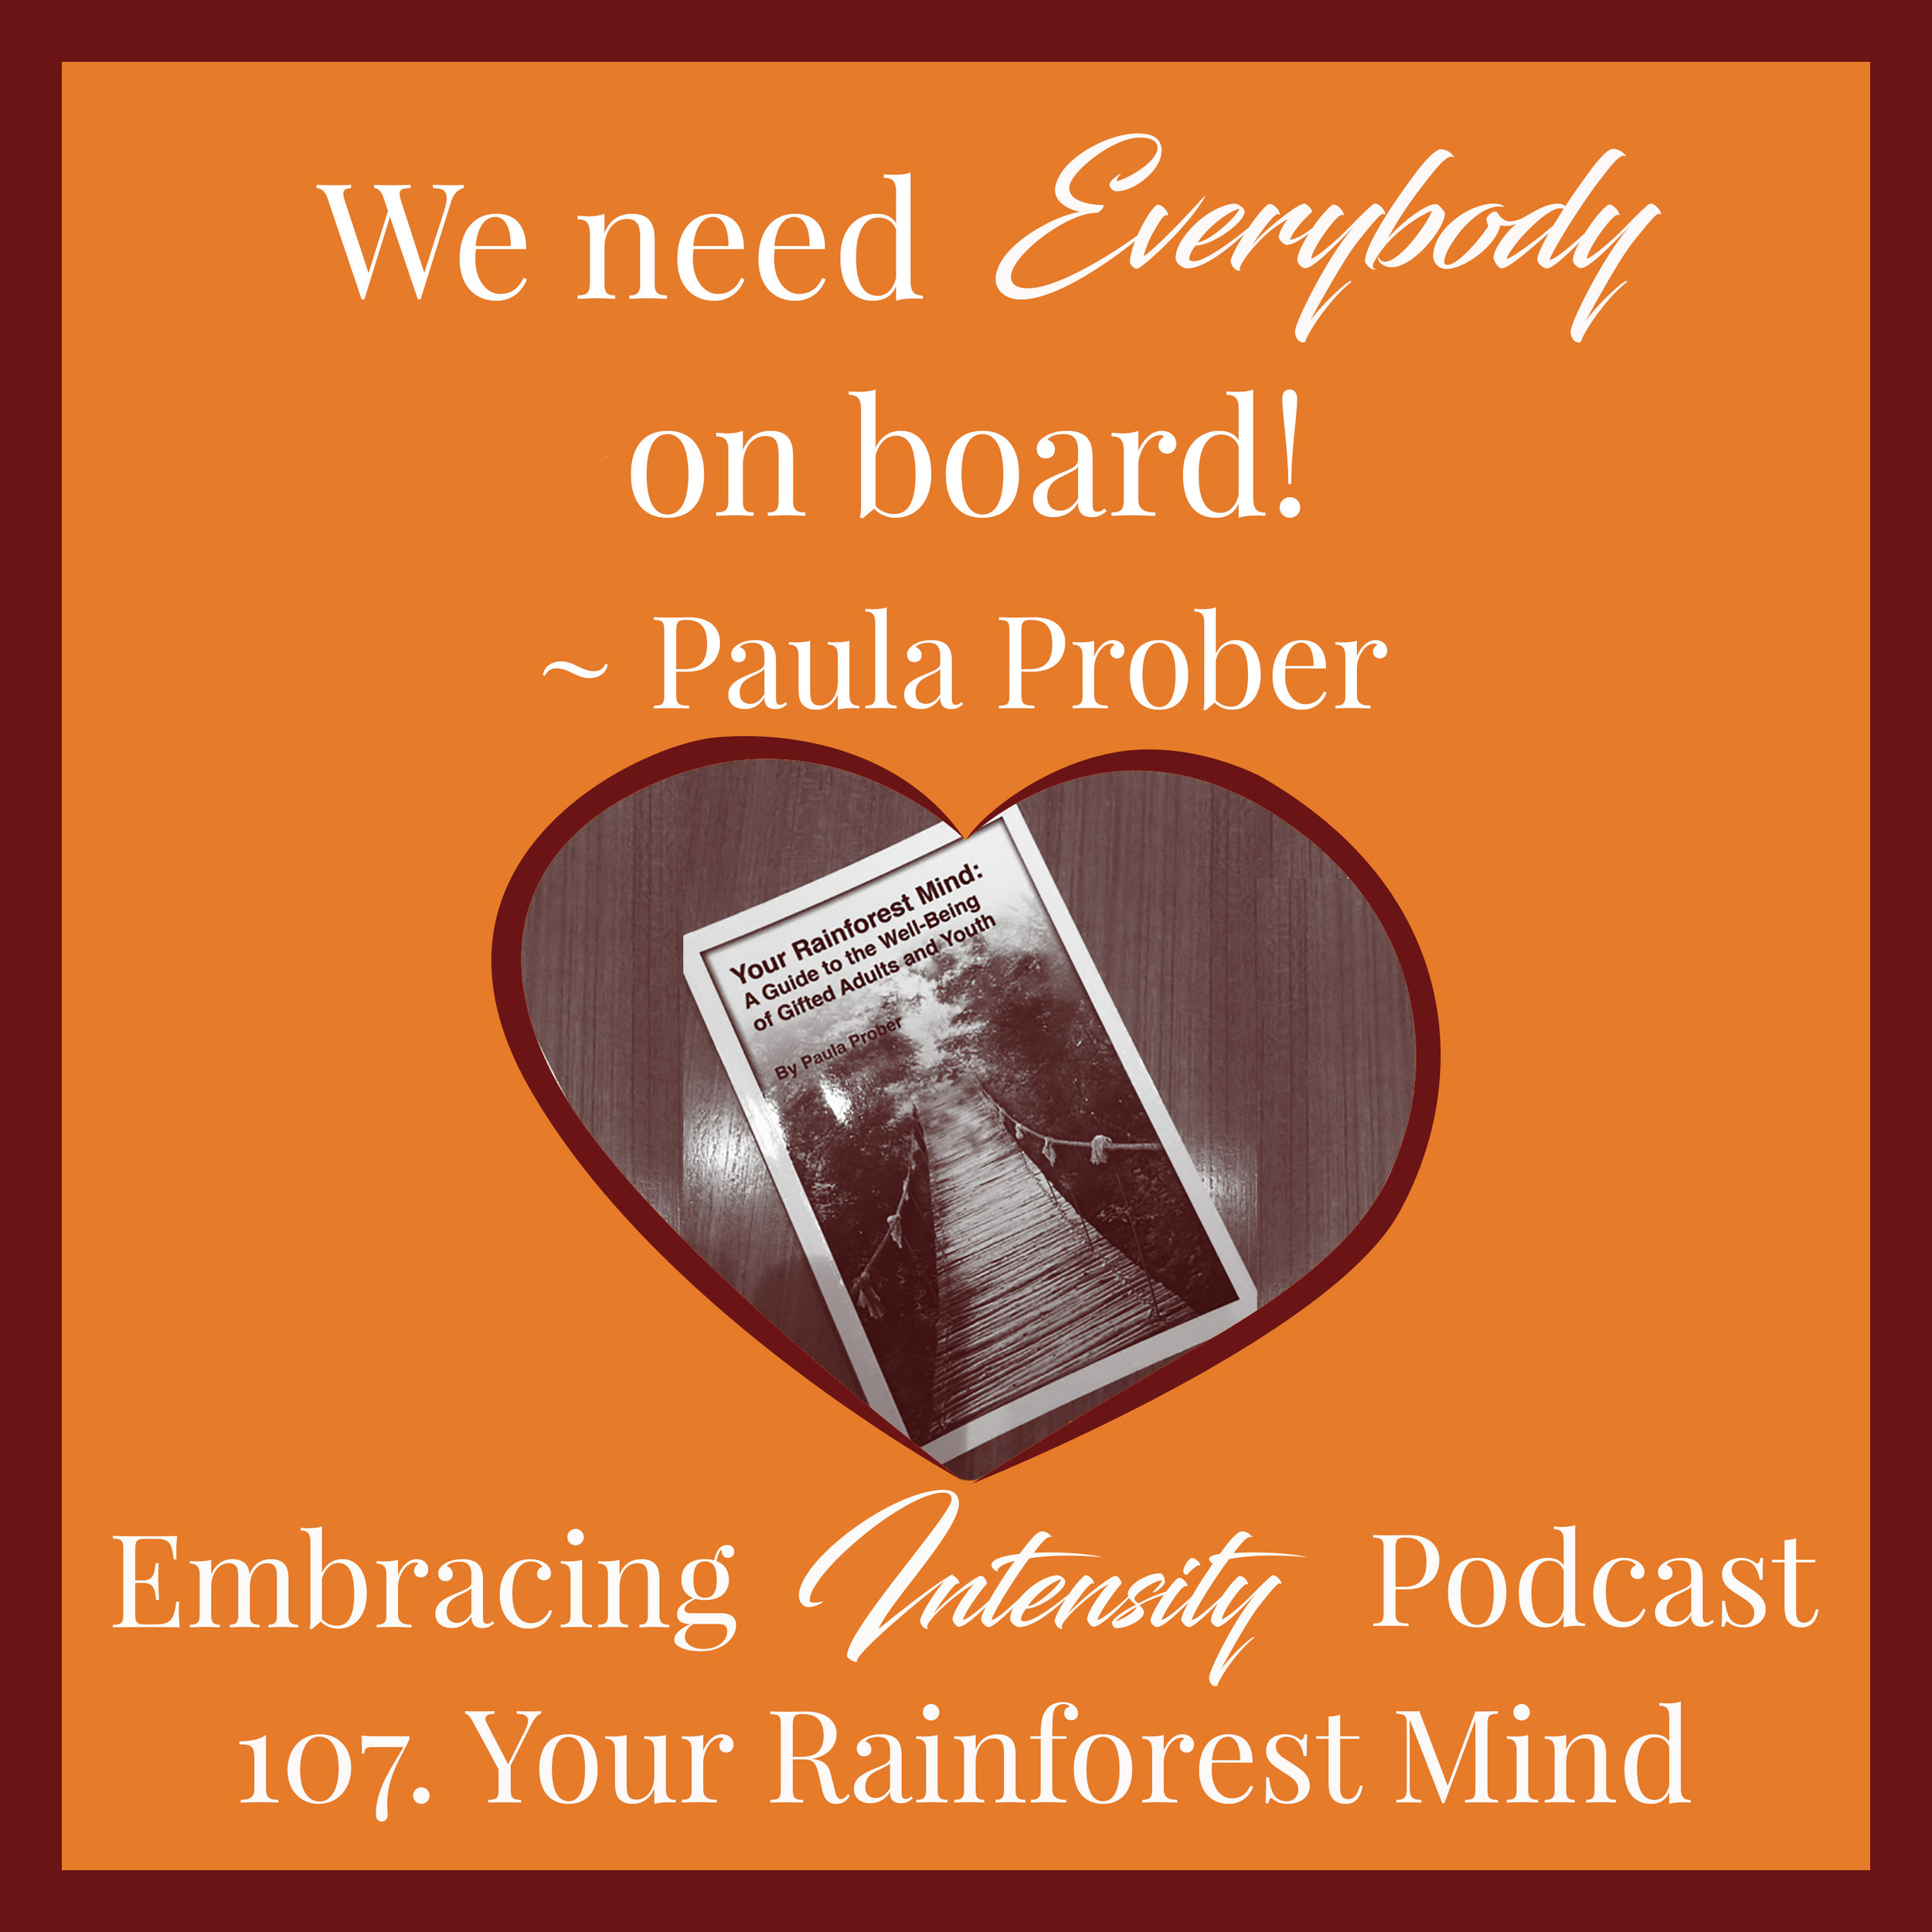 Your Rainforest Mind with Paula Prober